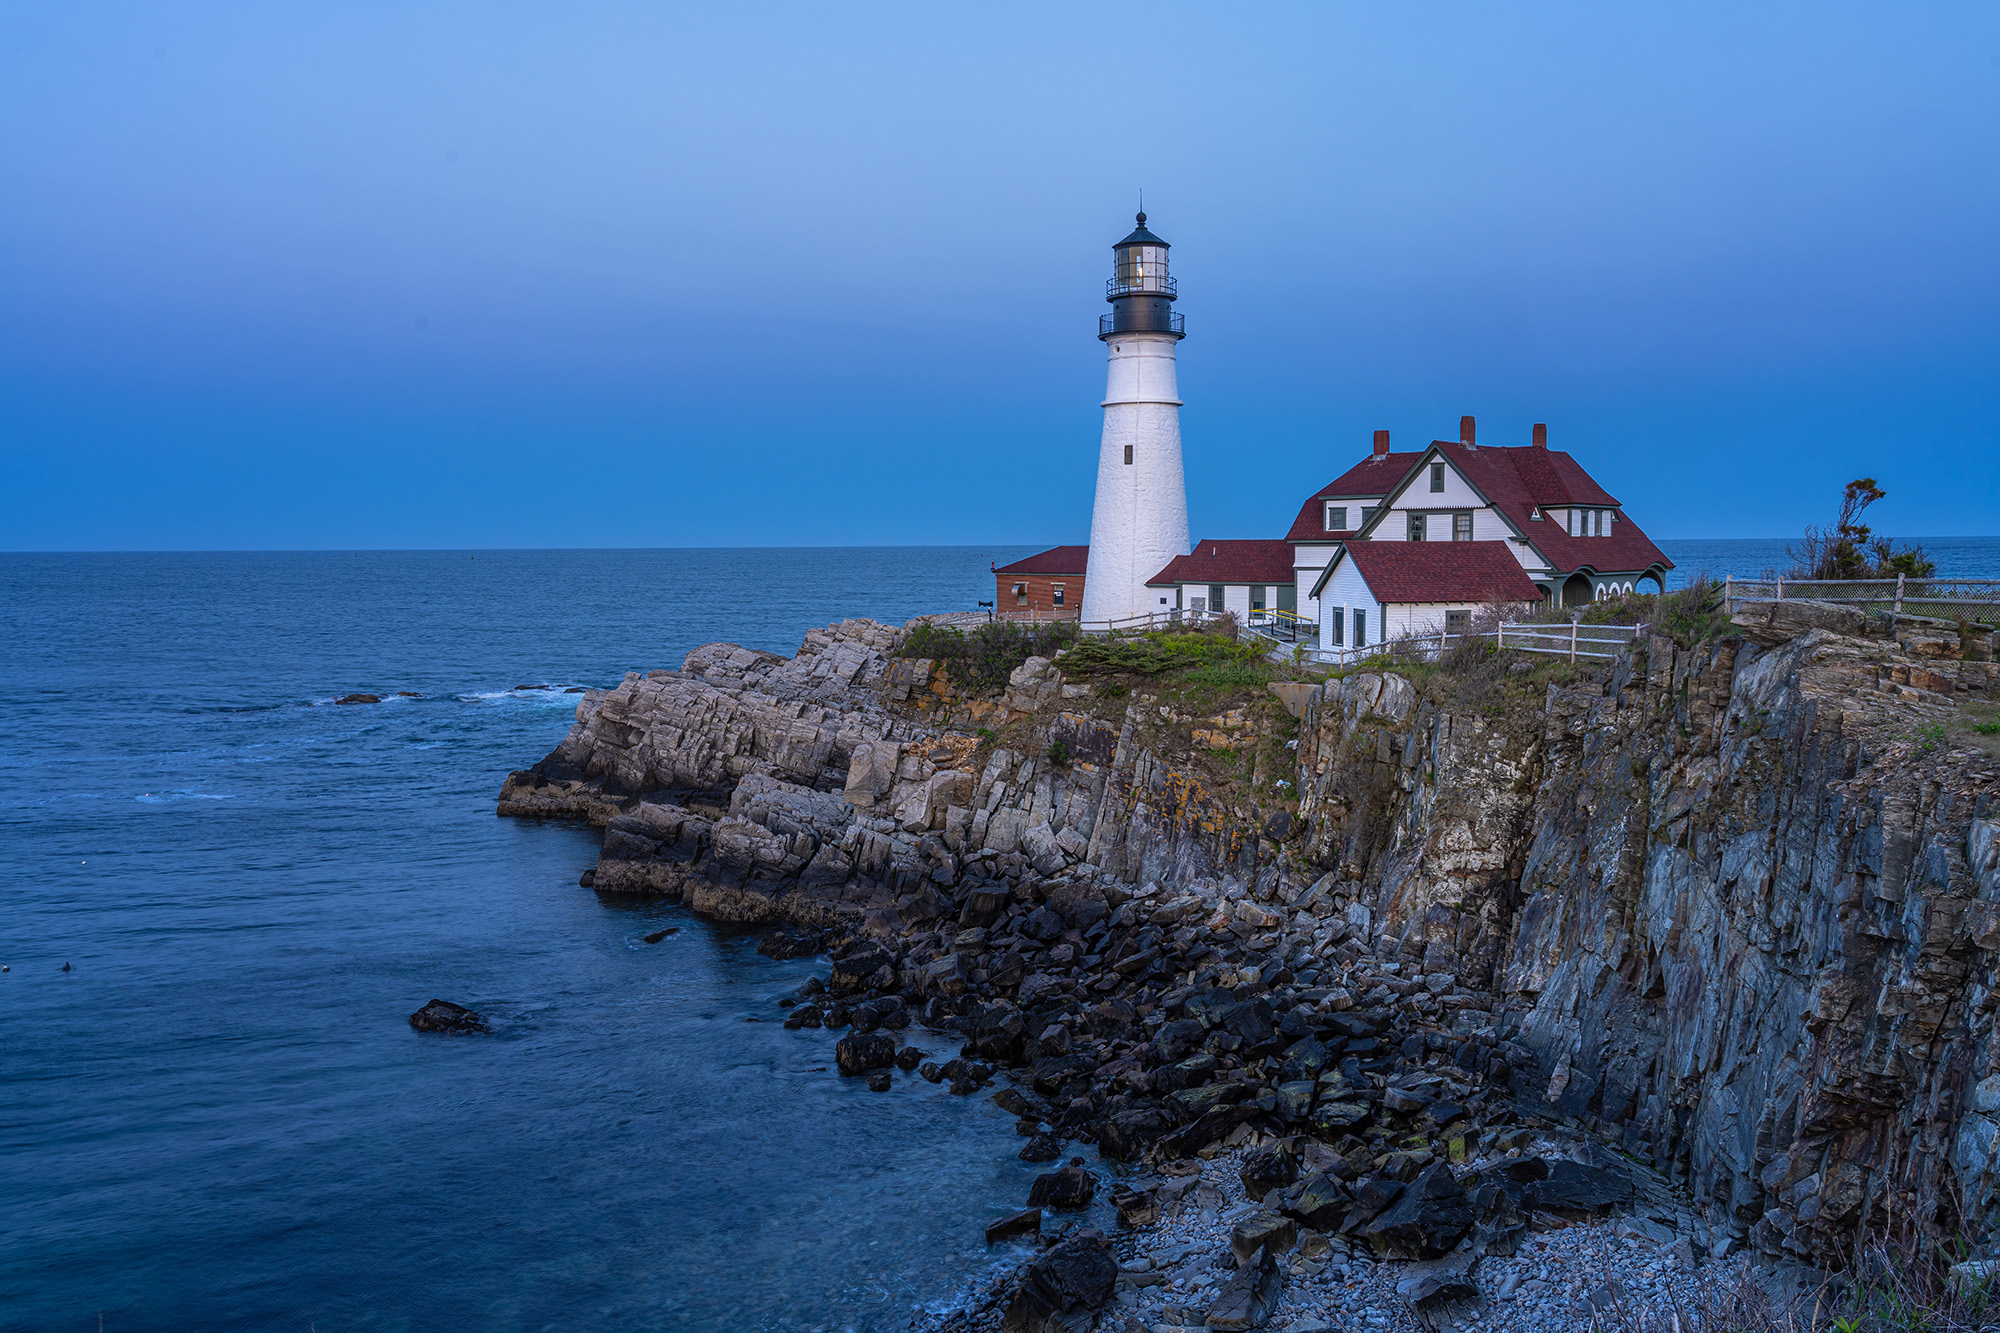 "Coastal Luminescence" captures the timeless beauty of Portland Head Lighthouse in Maine. During the fleeting blue hour, I seized...